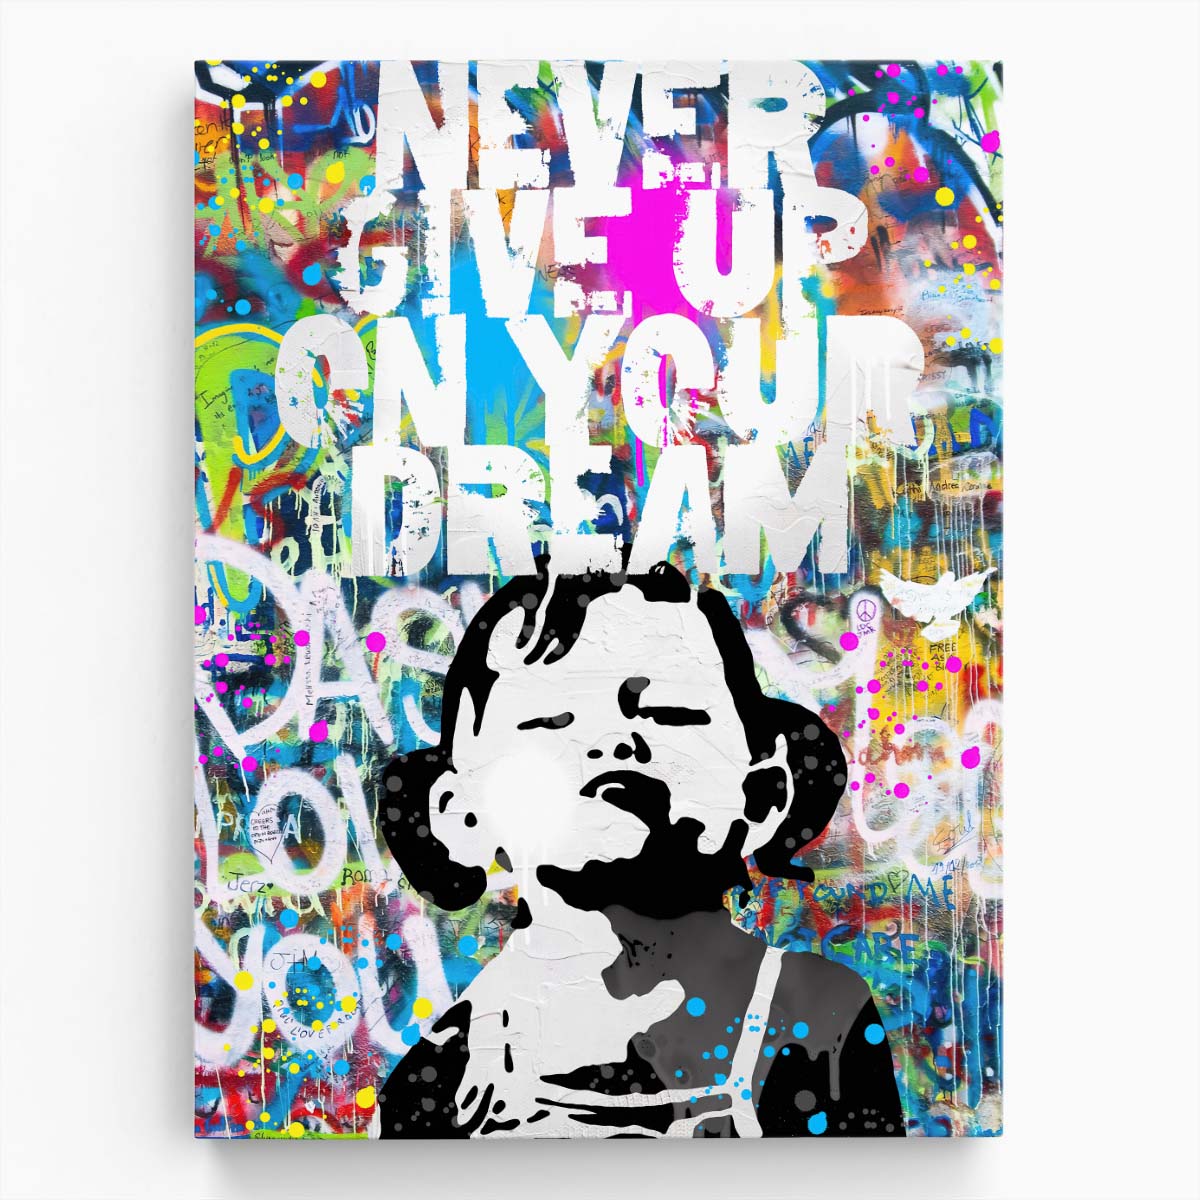 Banksy Never Give Up On Your Dream Wall Art by Luxuriance Designs. Made in USA.